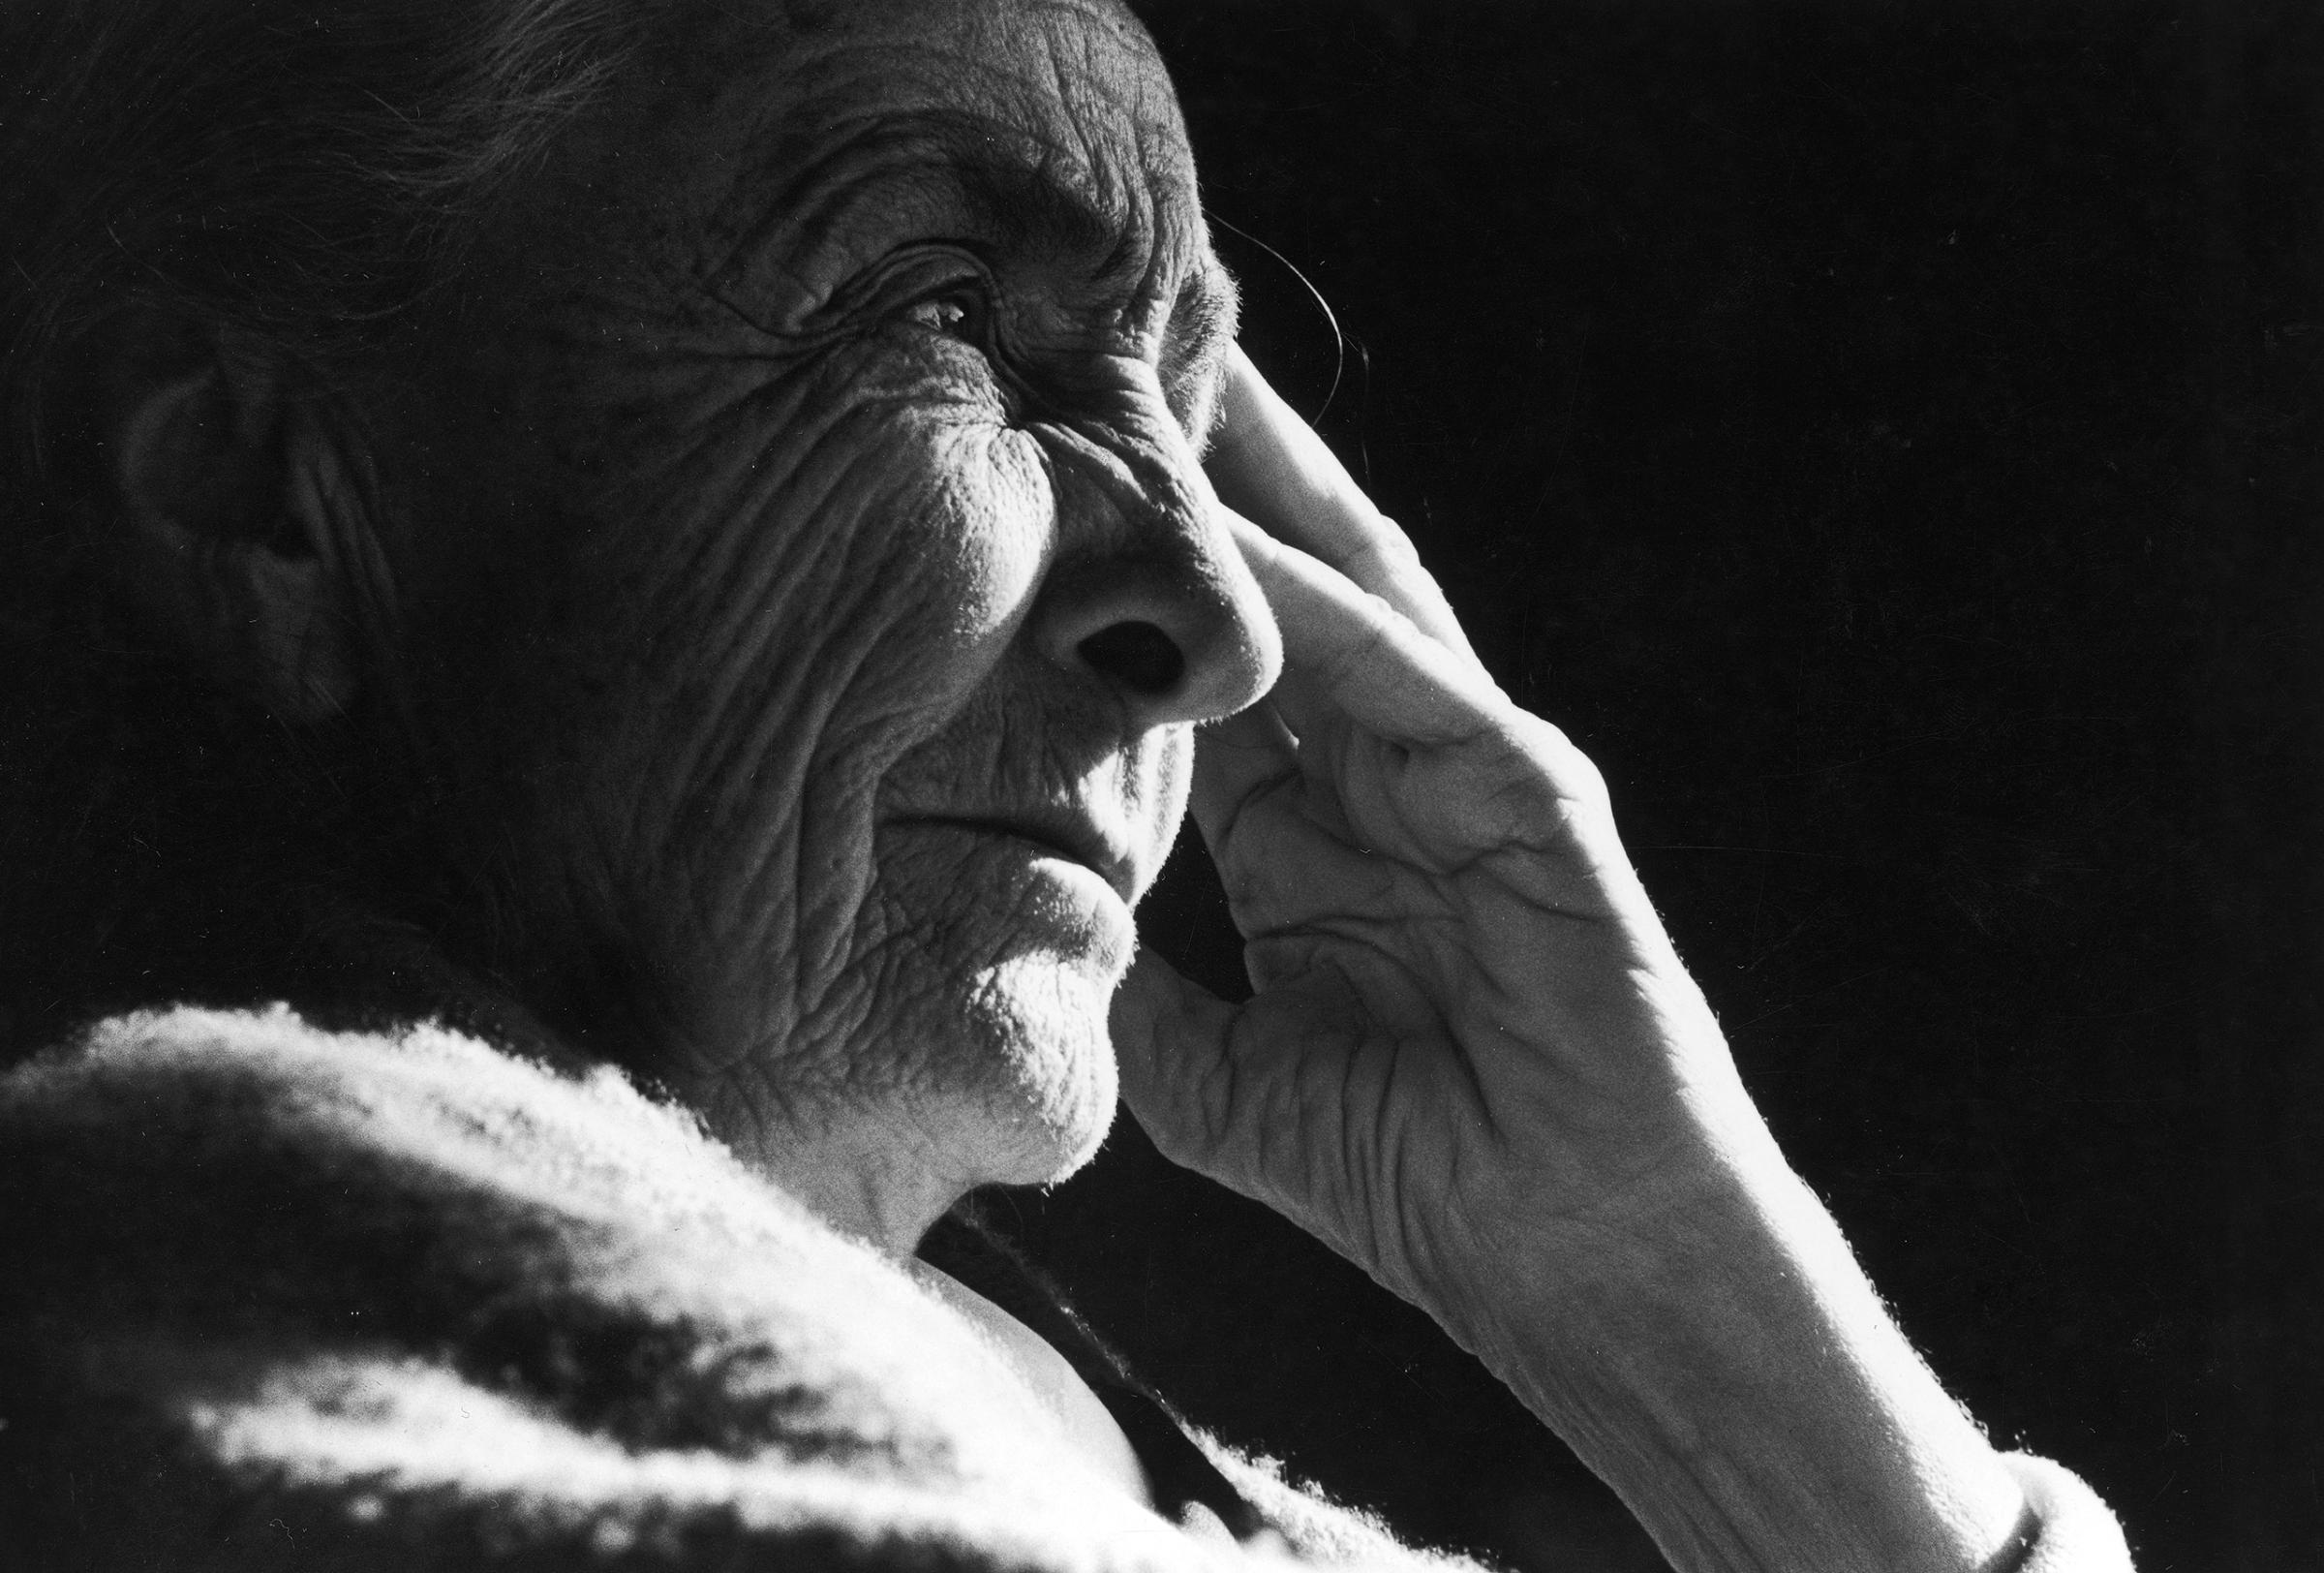 Artist Georgia O'Keeffe at her home in New Mexico, 1968.